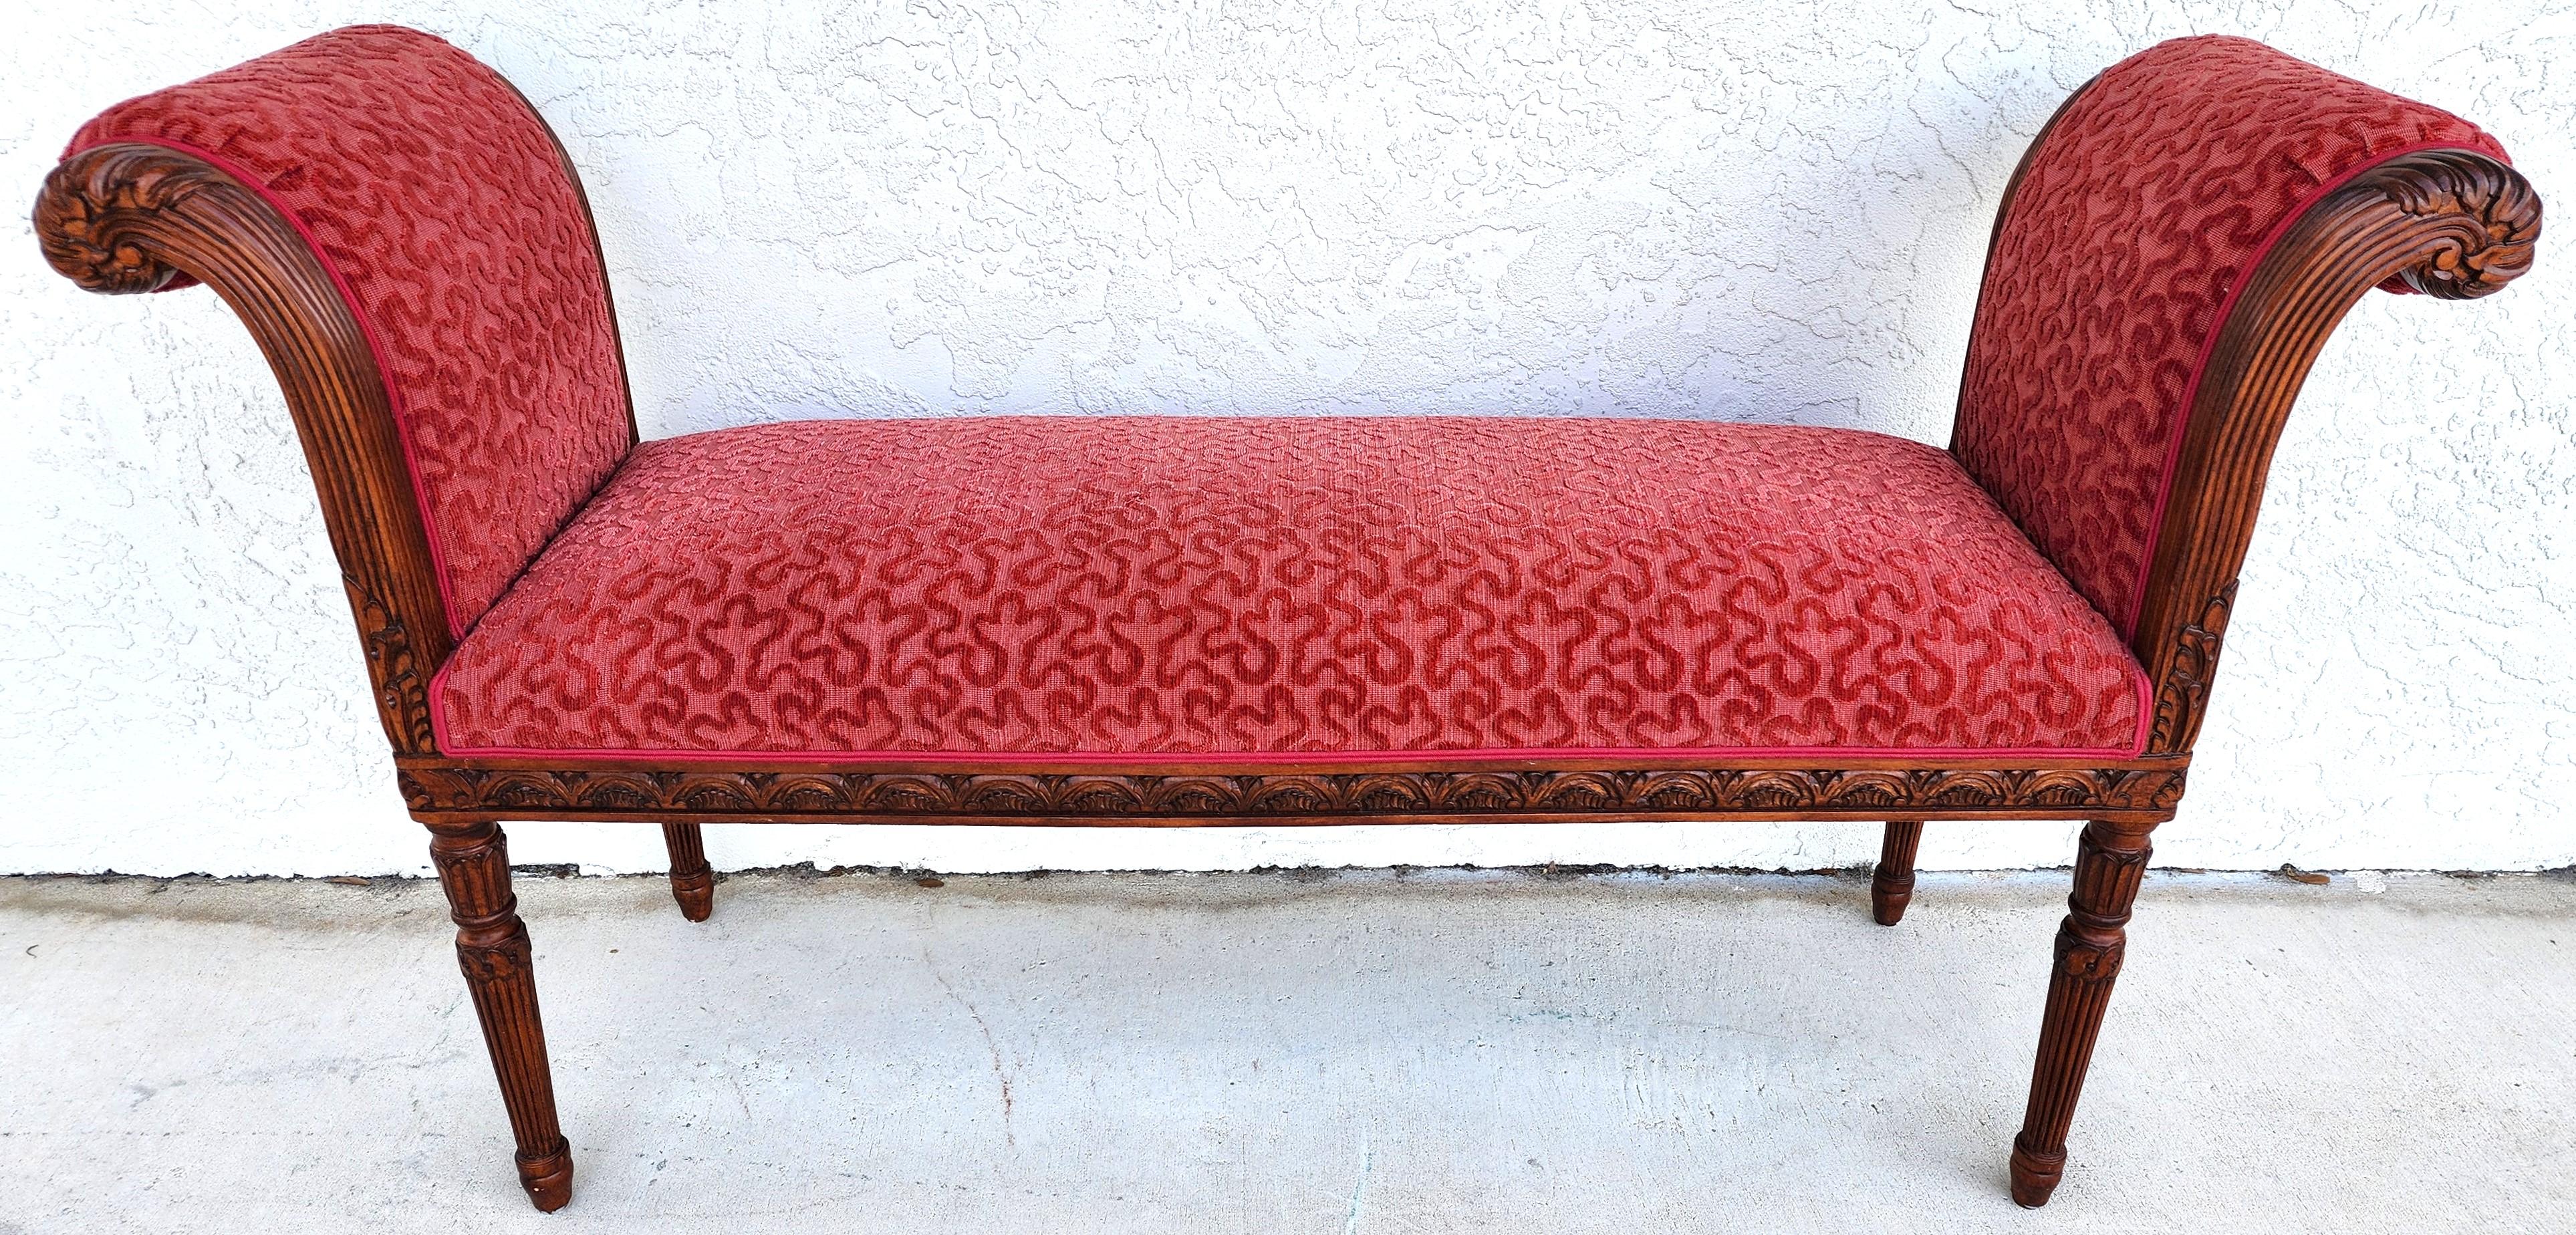 For FULL item description click on CONTINUE READING at the bottom of this page.

Offering One Of Our Recent Palm Beach Estate Fine Furniture Acquisitions Of An
Edward Ferrell Neoclassical revival style window bench in carved wood with Burnout Velvet